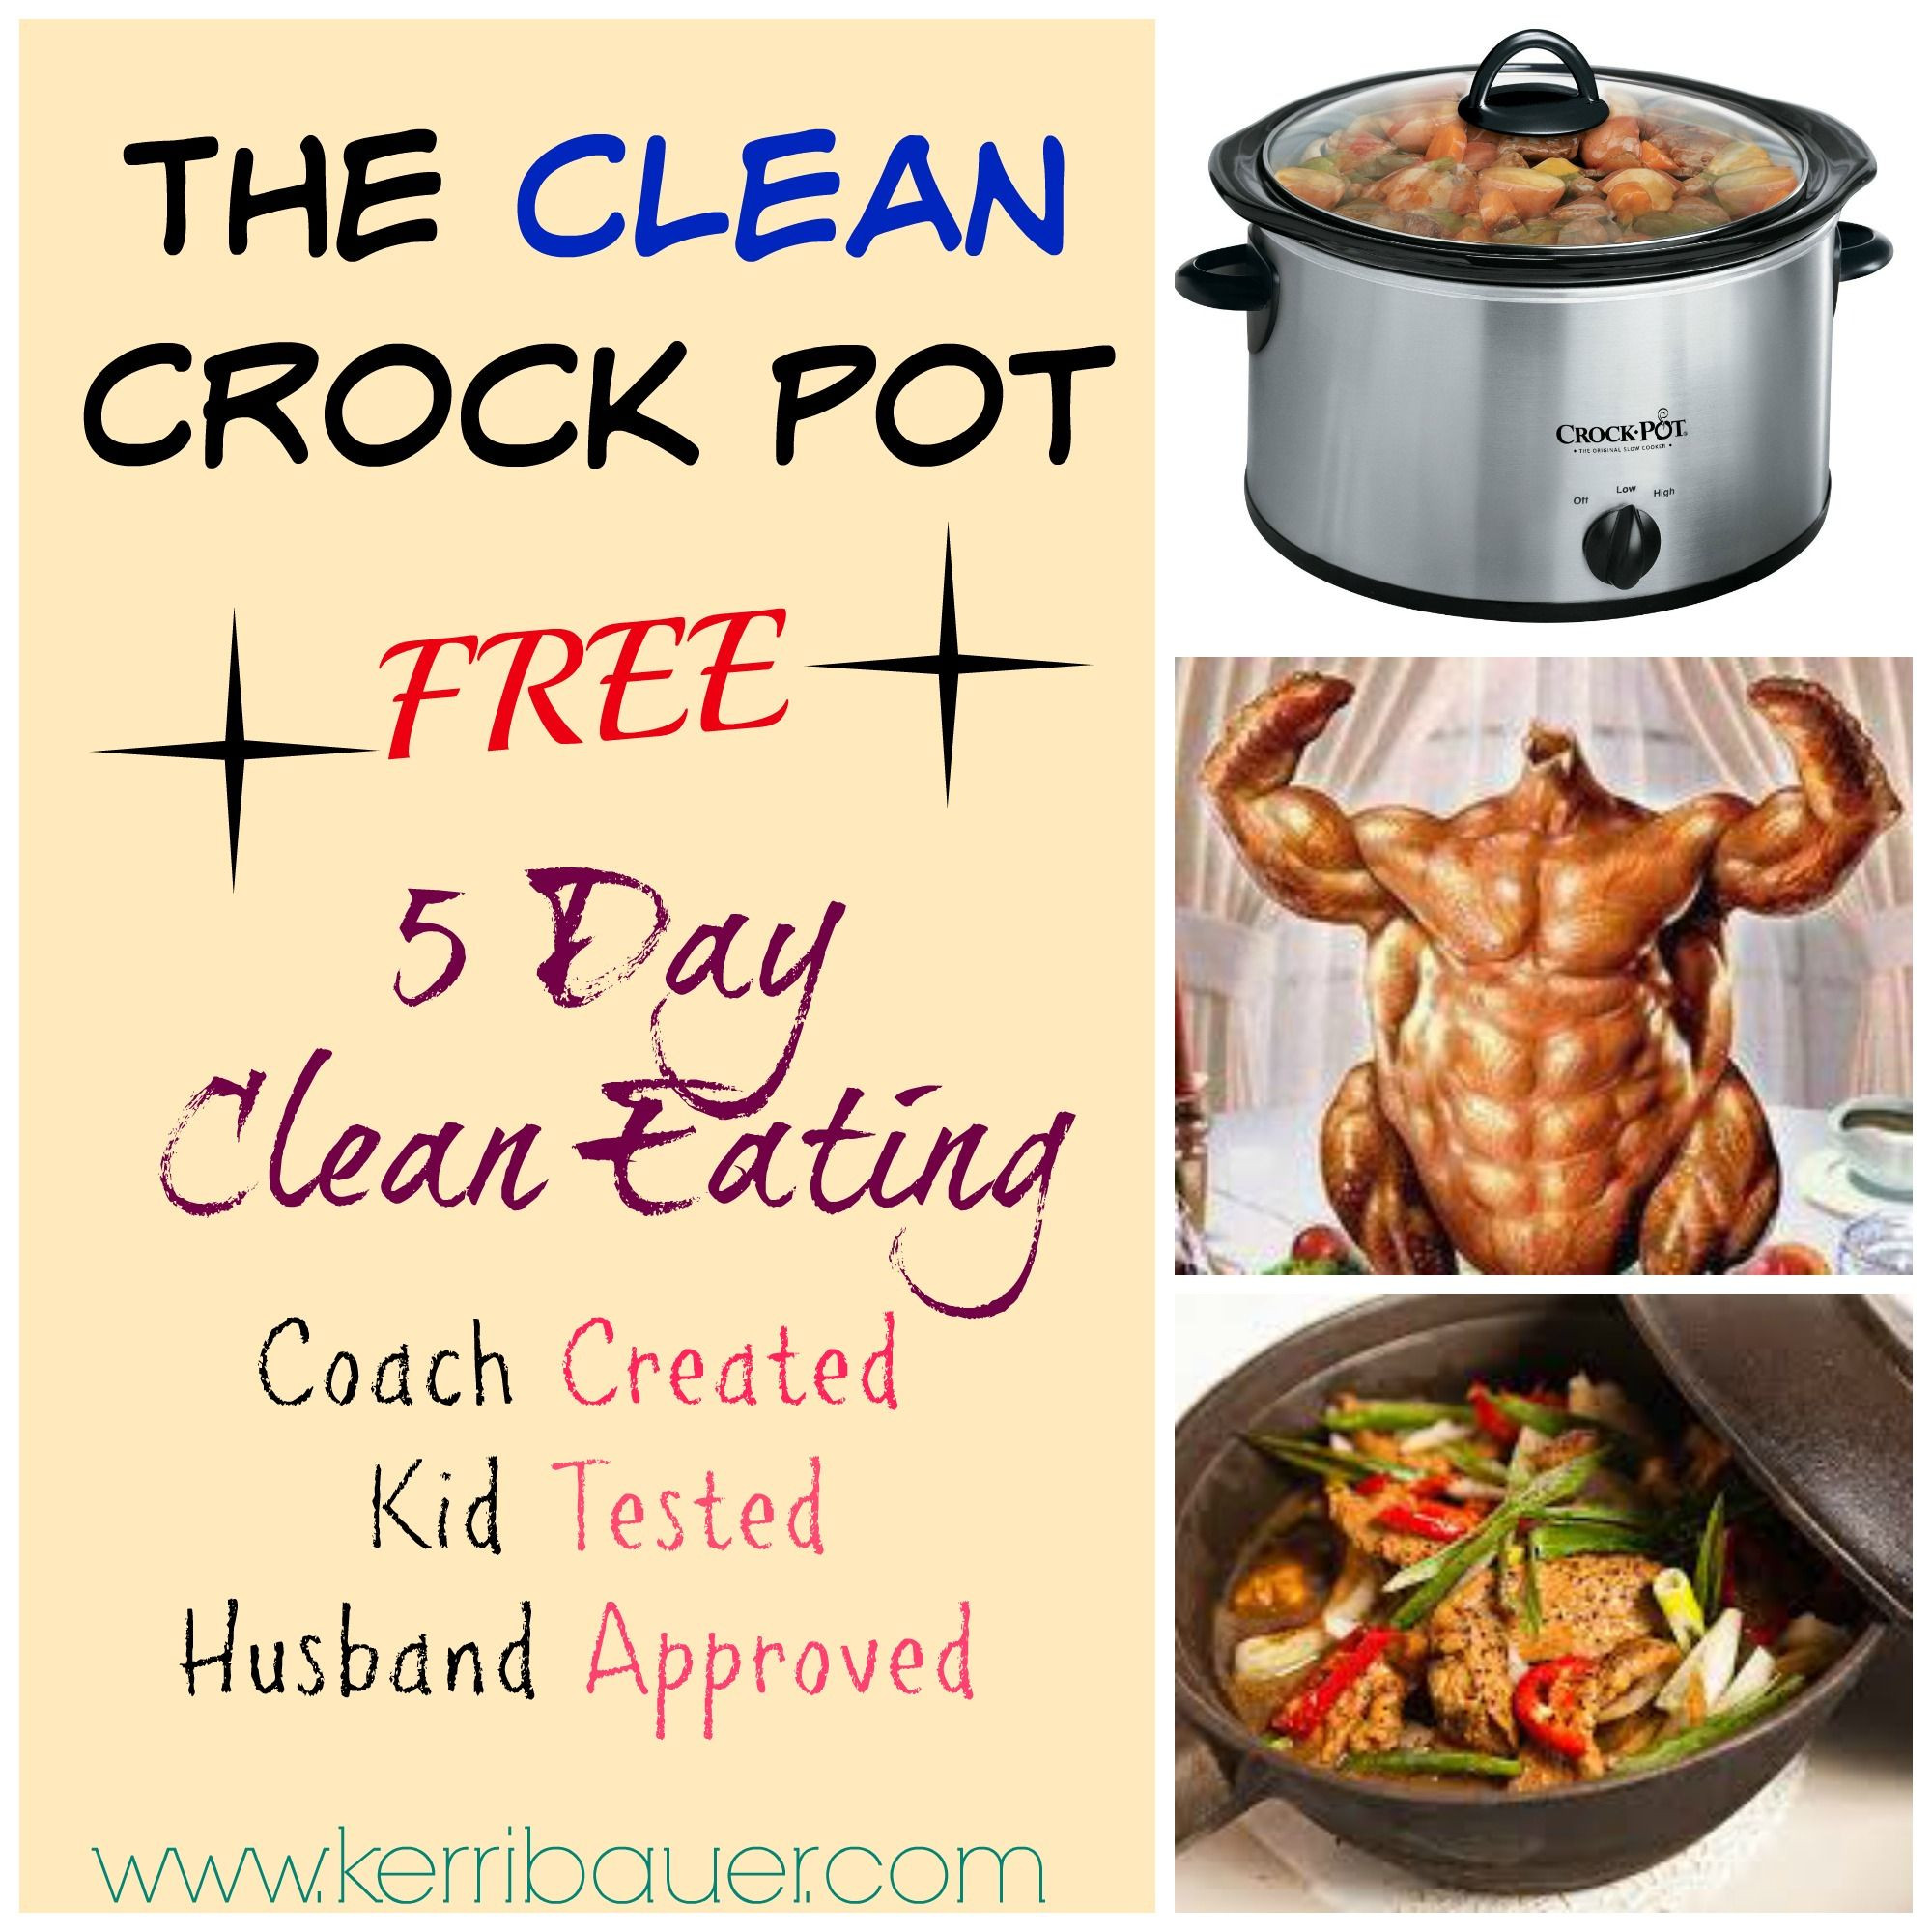 Clean Eating Crockpot Meals
 youre invited to a 5 day clean eating crock pot group